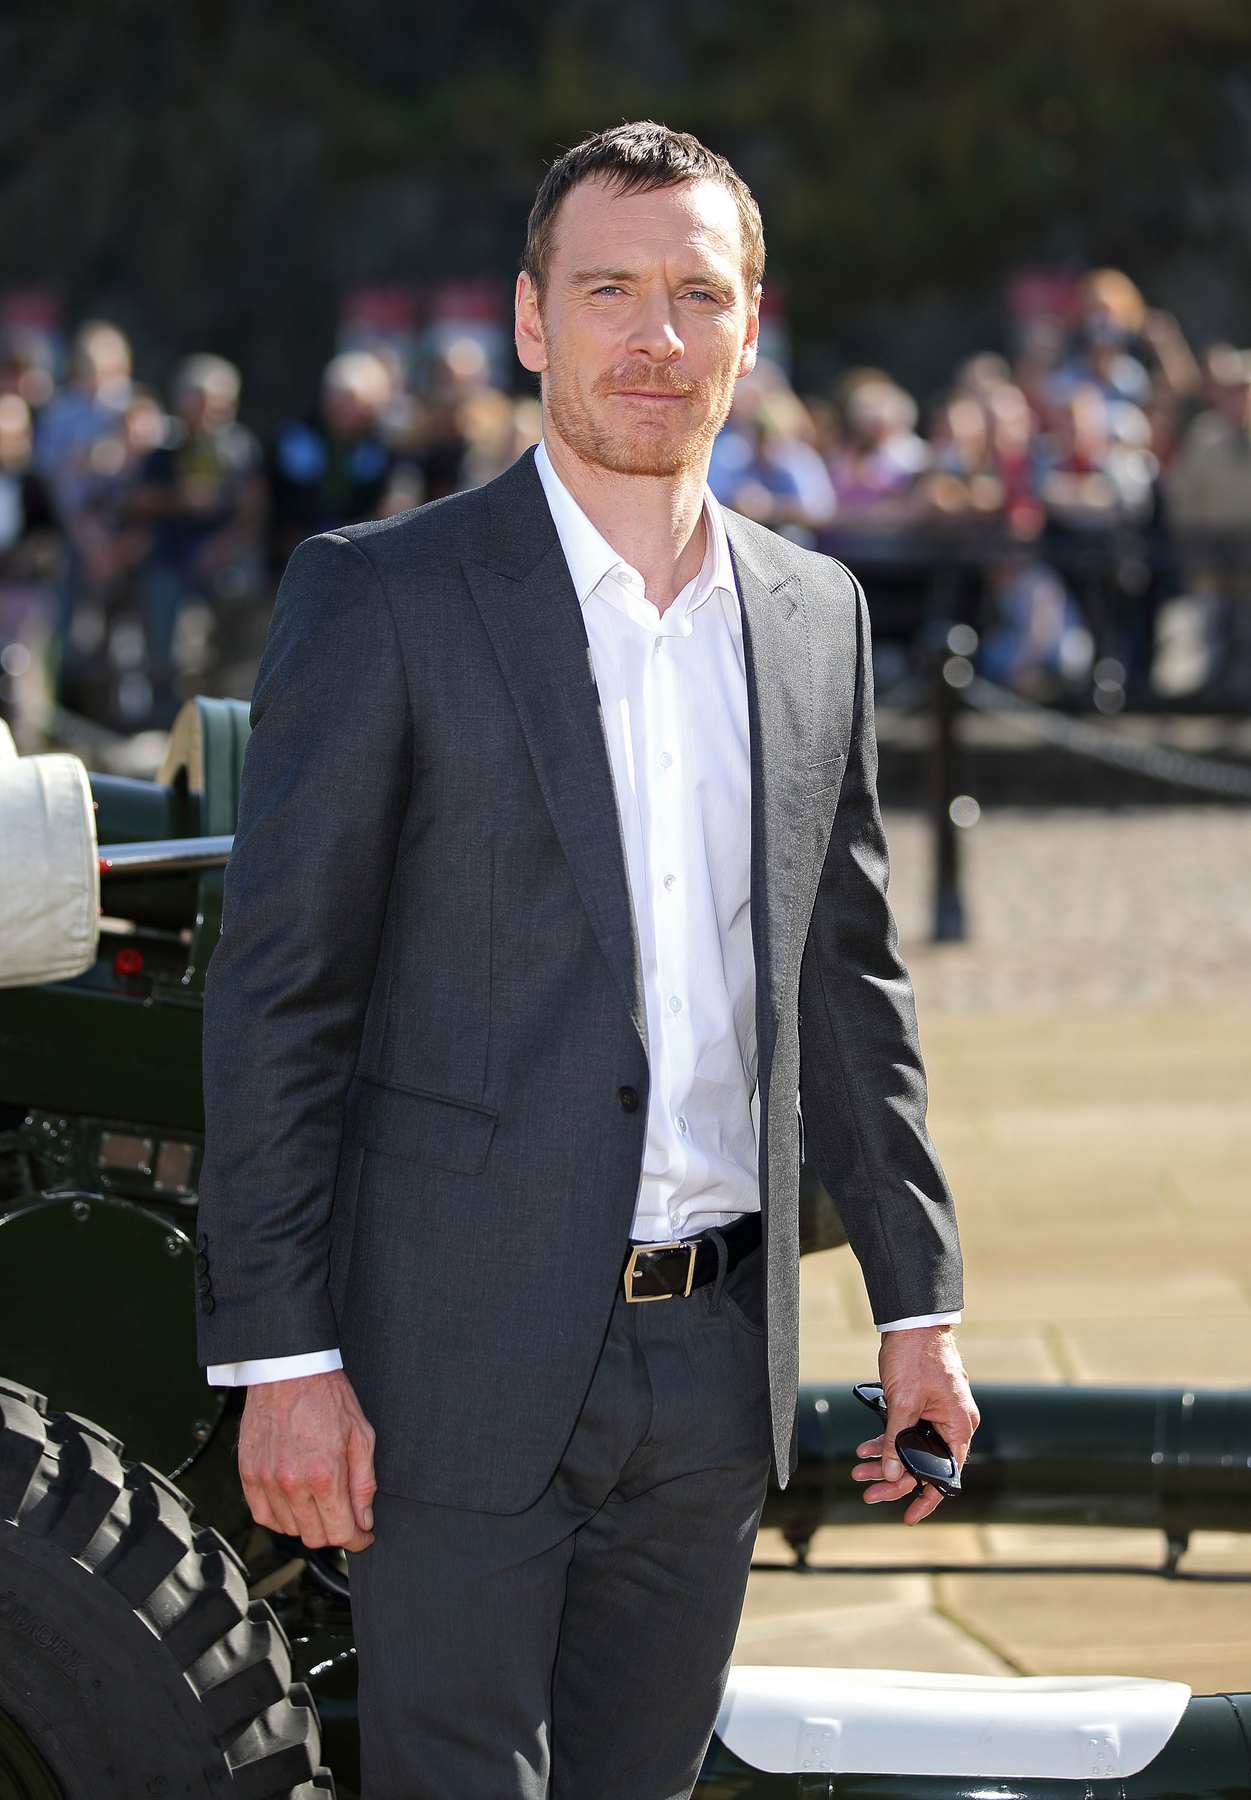 Michael Fassbender Looks Handsome at Macbeth Photocall and Premiere